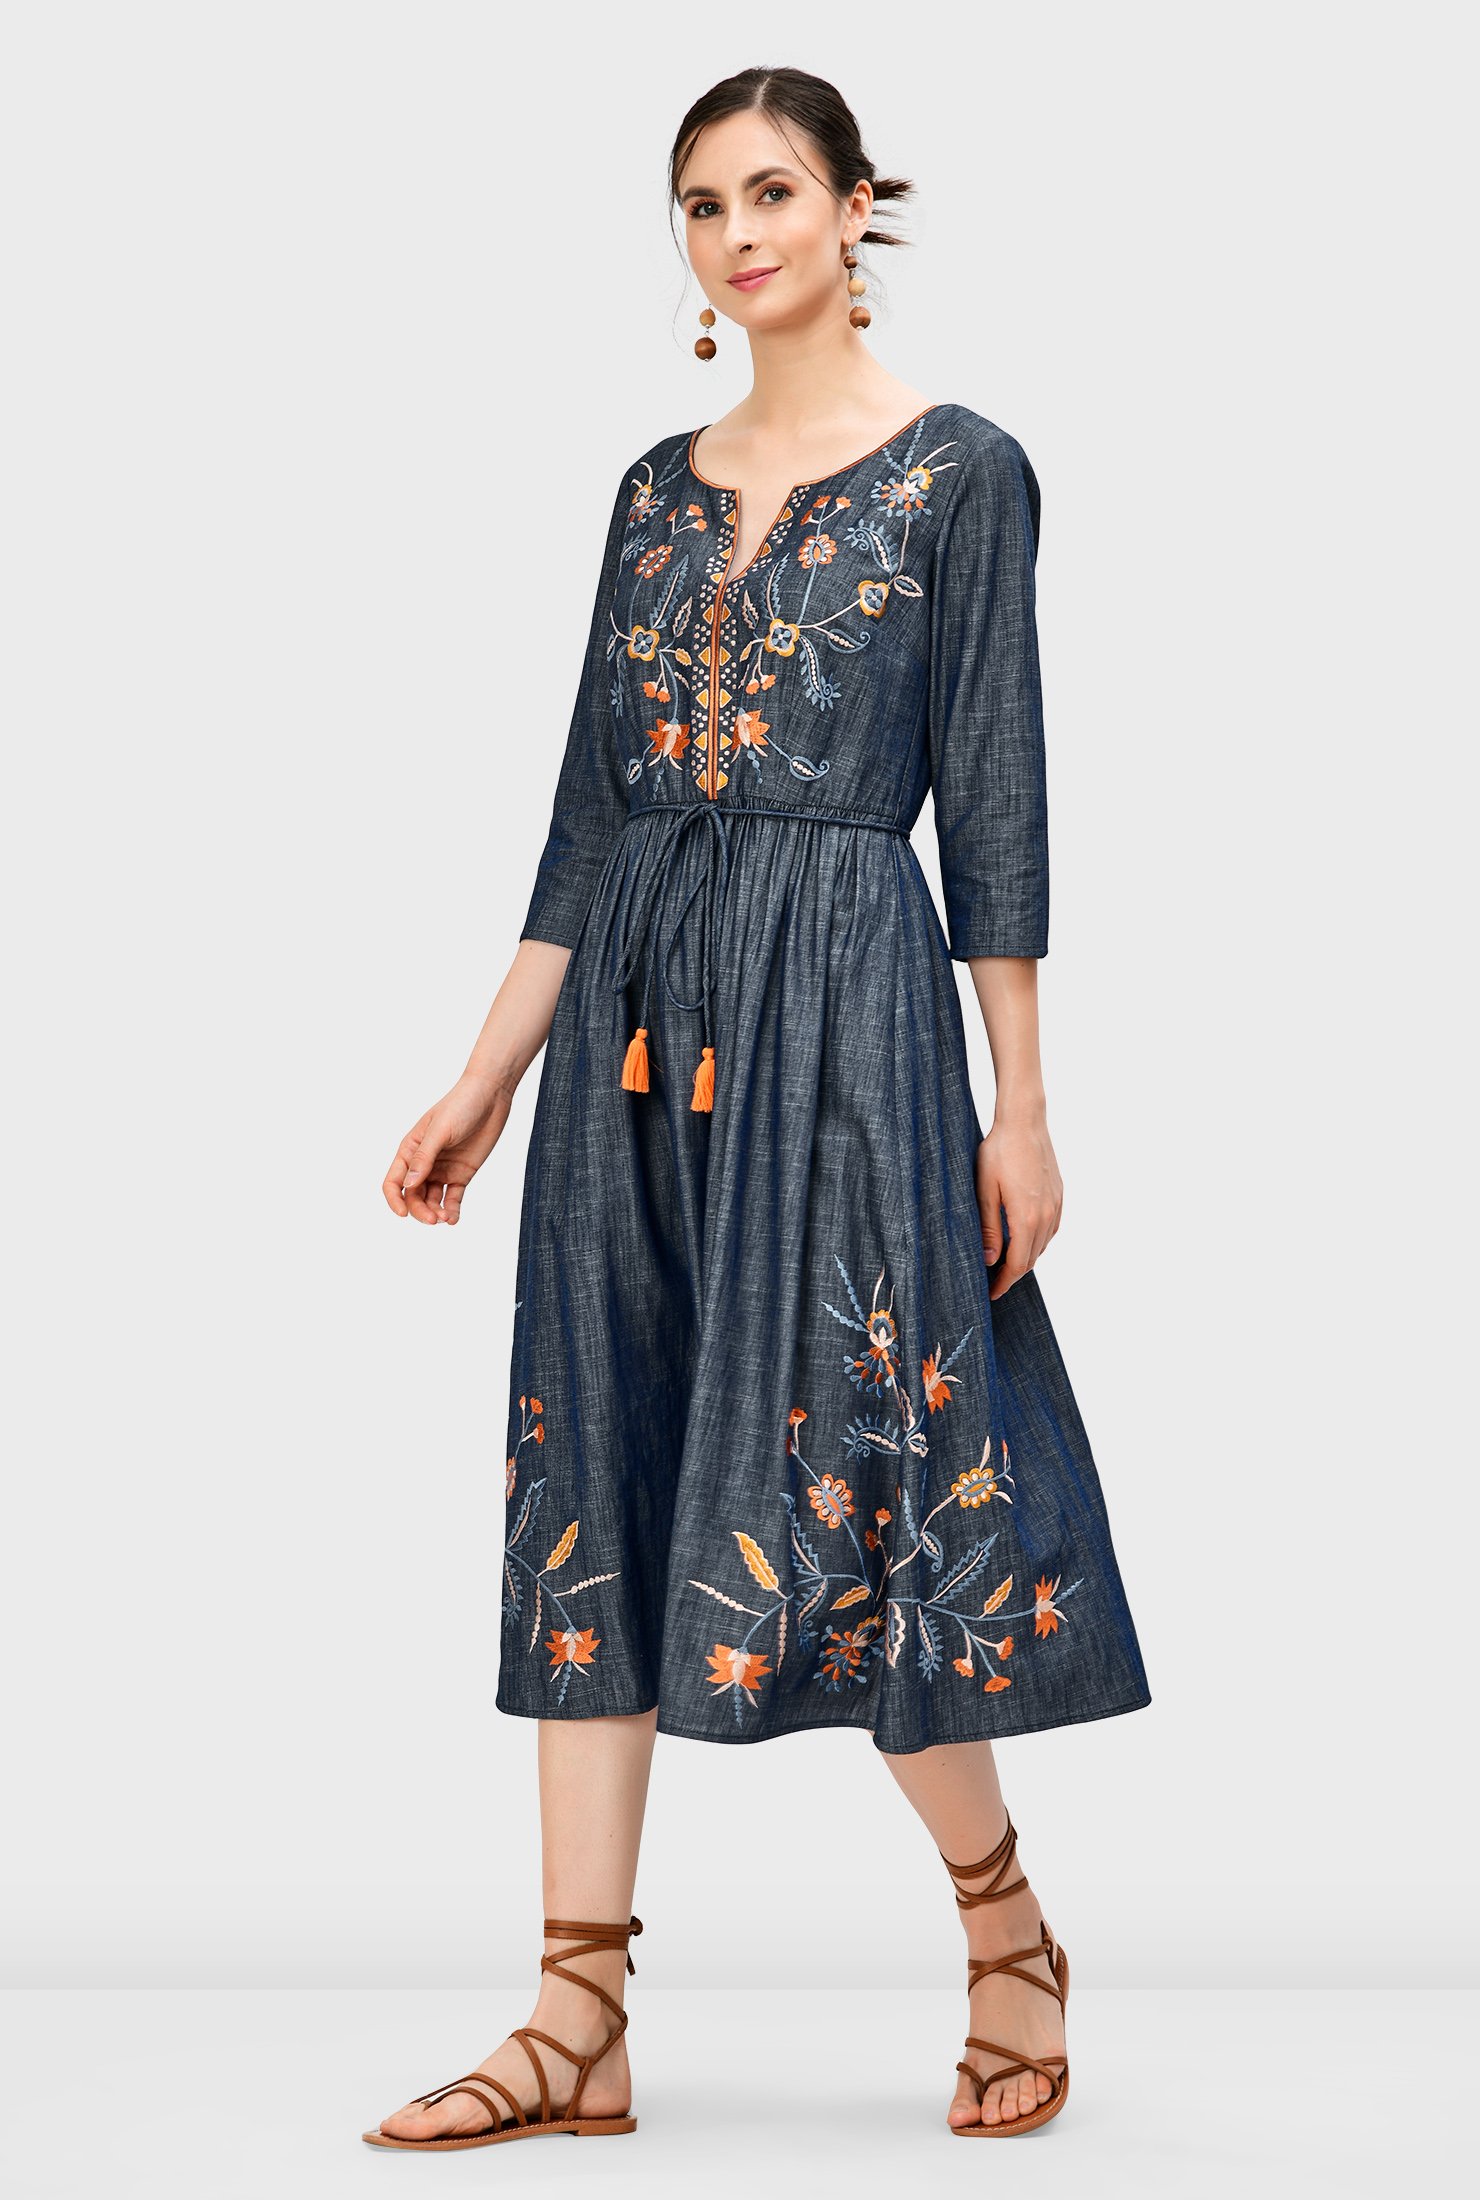 Perfect your work-from-anywhere style with our versatile cotton chambray dress with floral vine embroidery that strikes a balance between ease and elegance. 